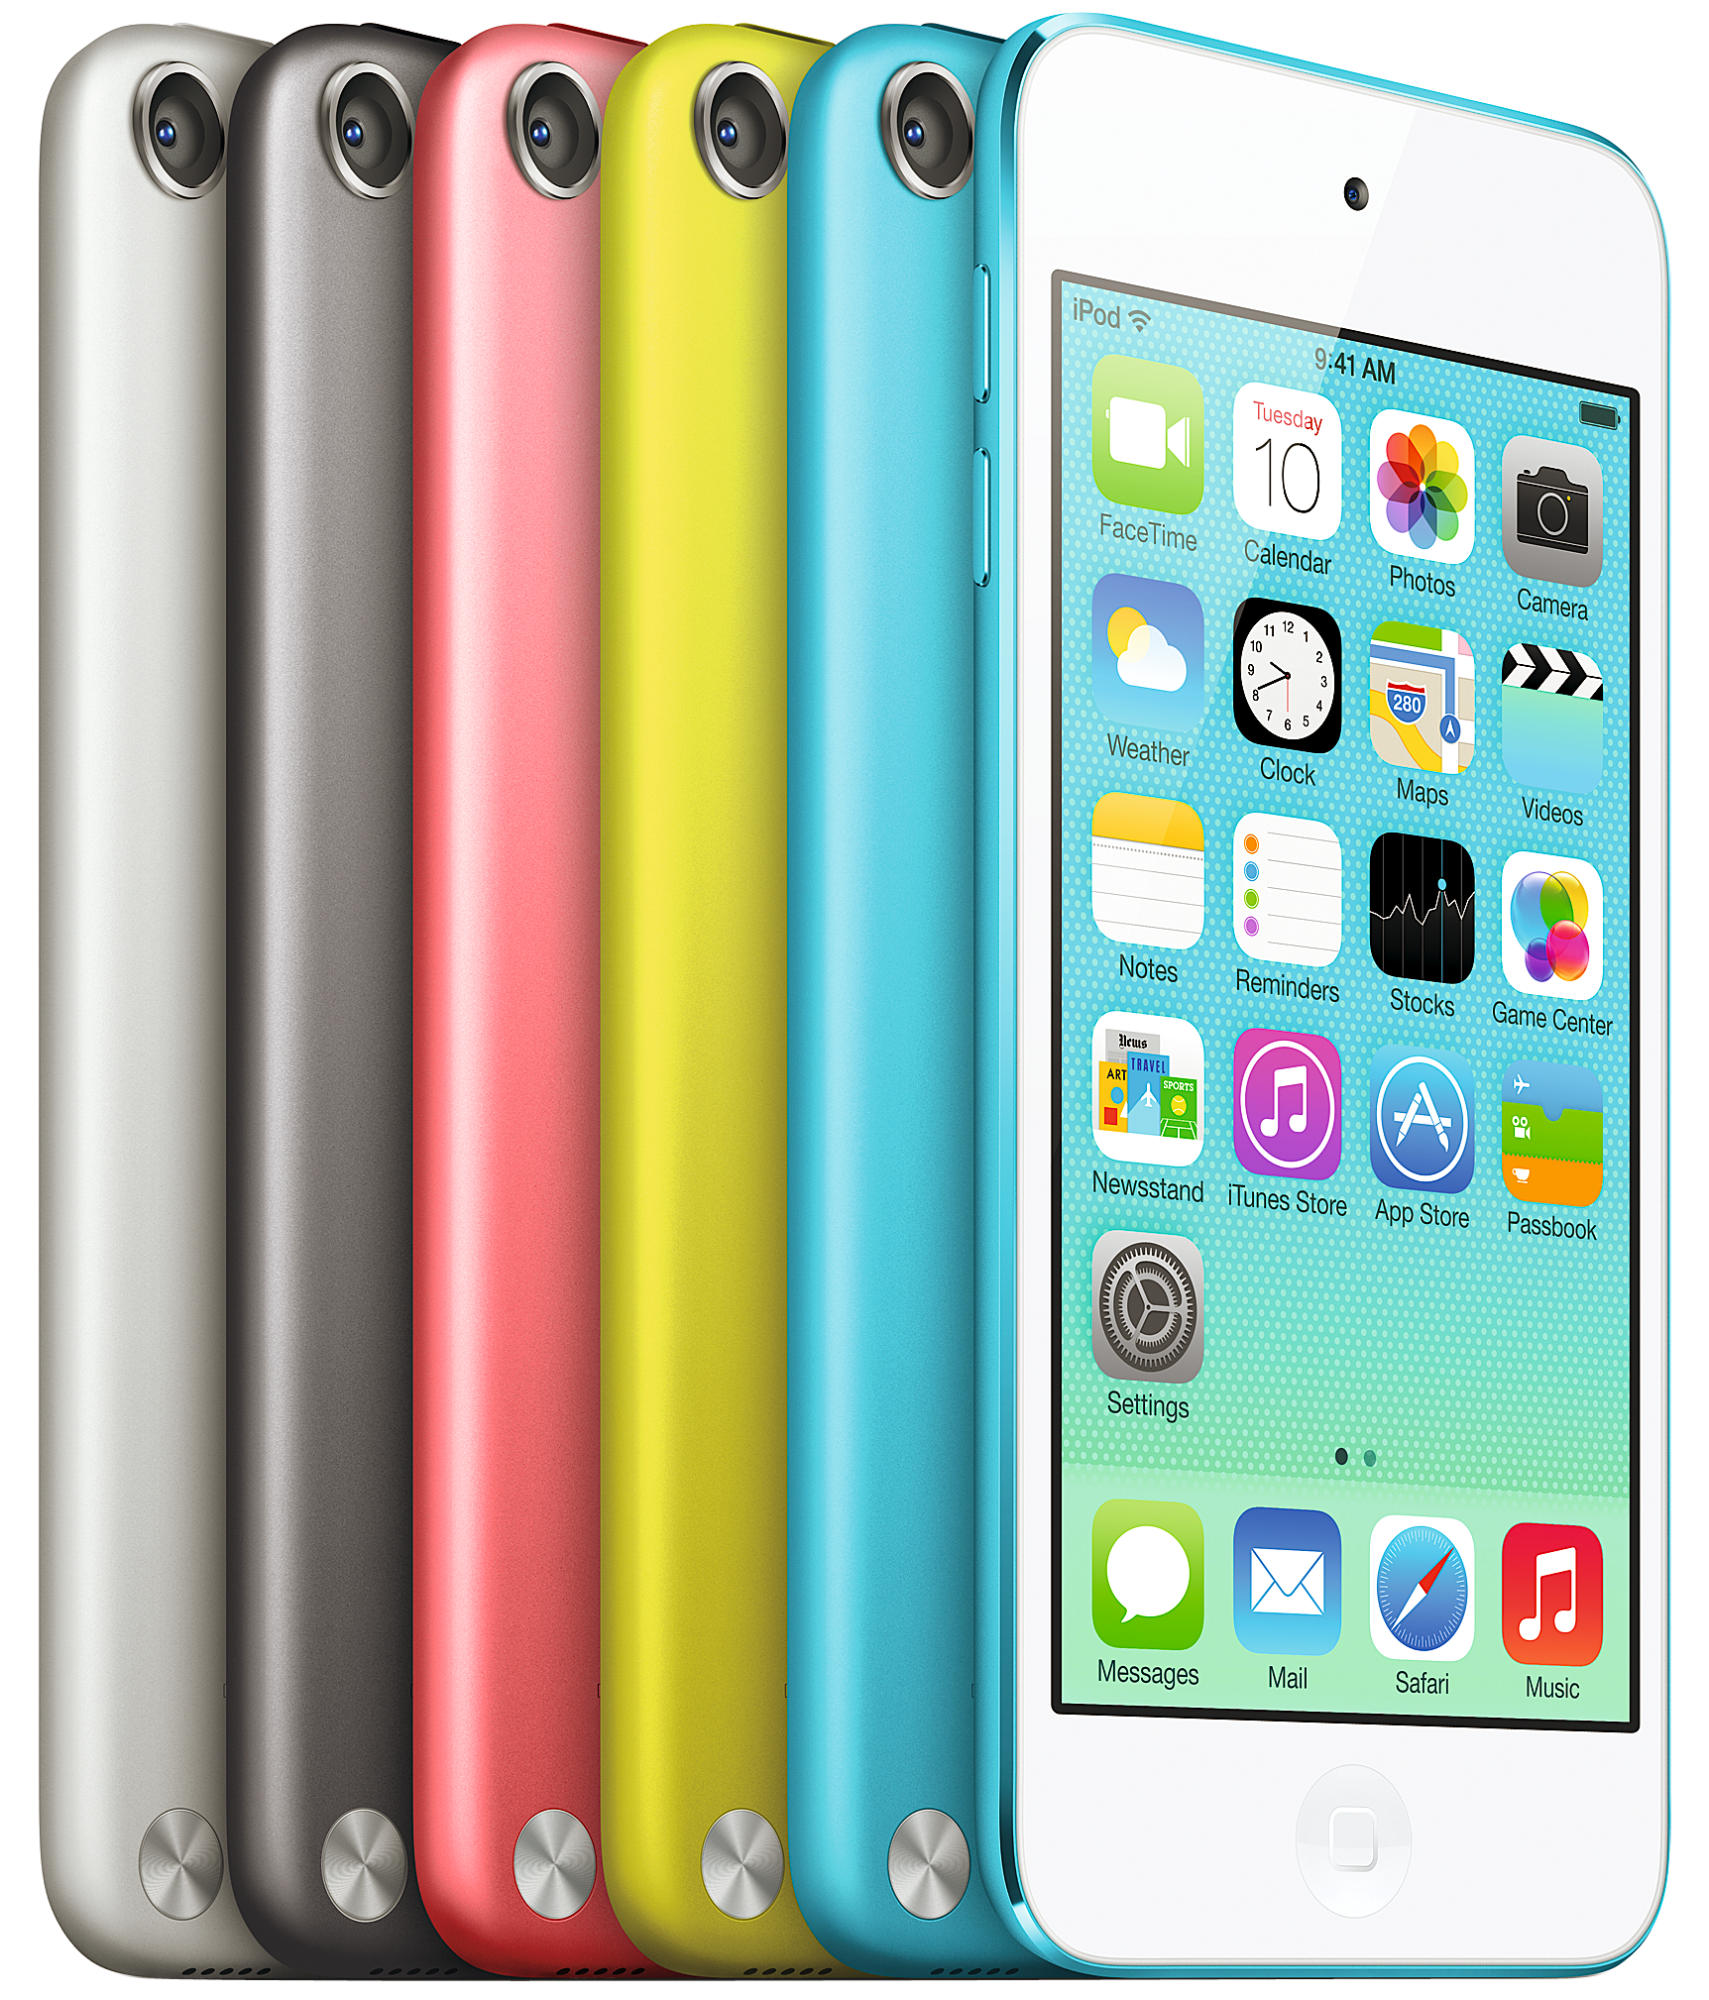 APPLE iPod touch MP4 Player, Gelb